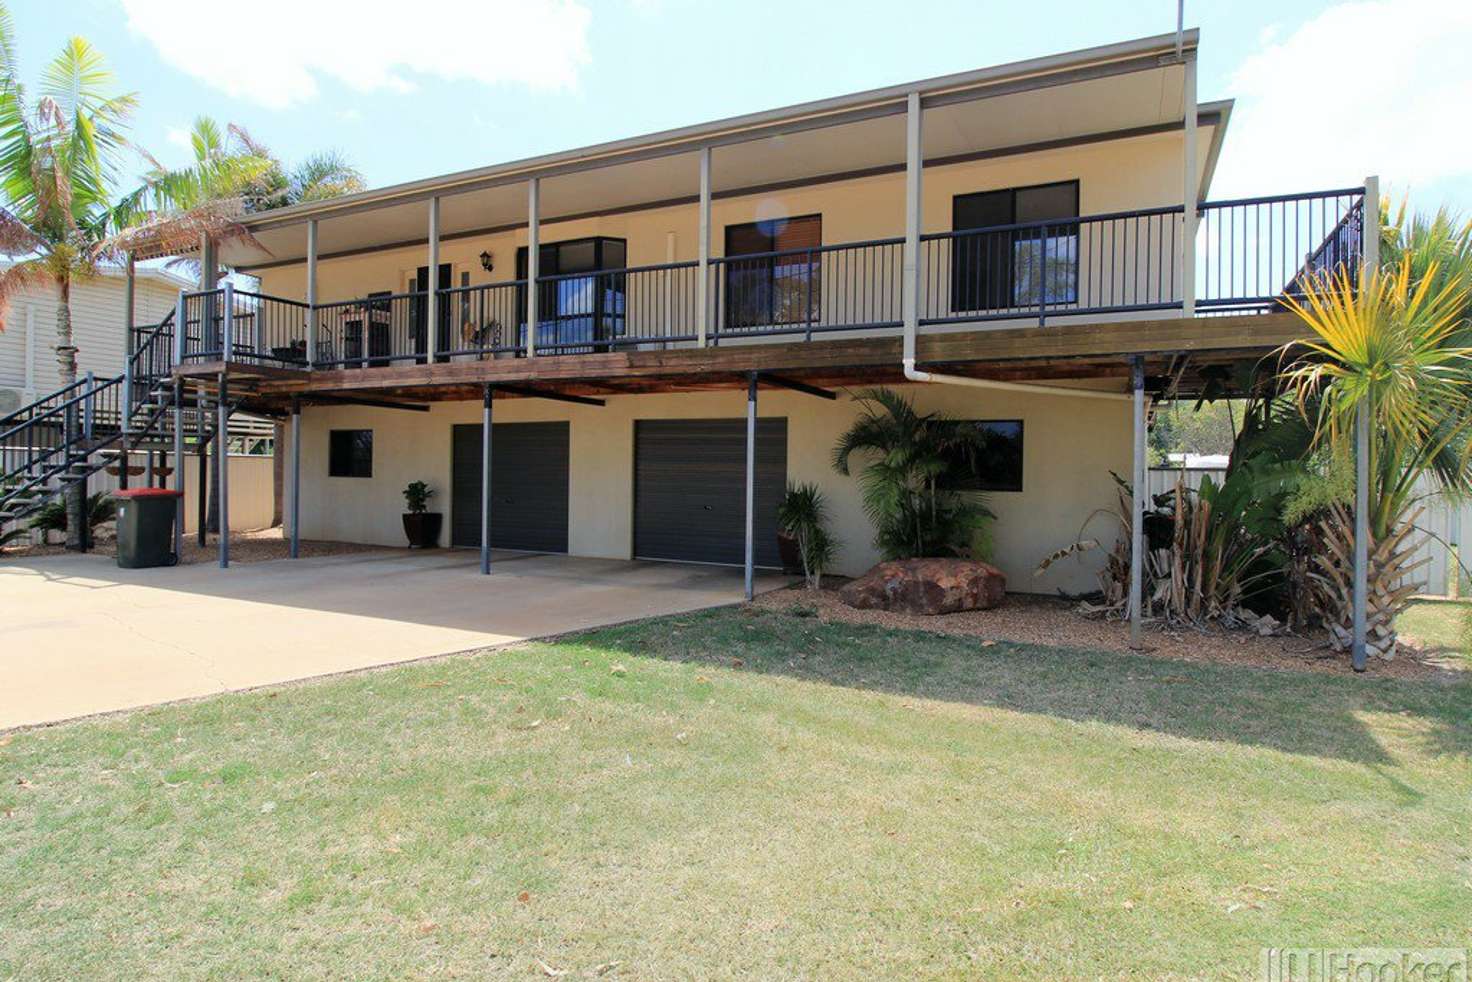 Main view of Homely house listing, 2 Tropic Street, Clermont QLD 4721